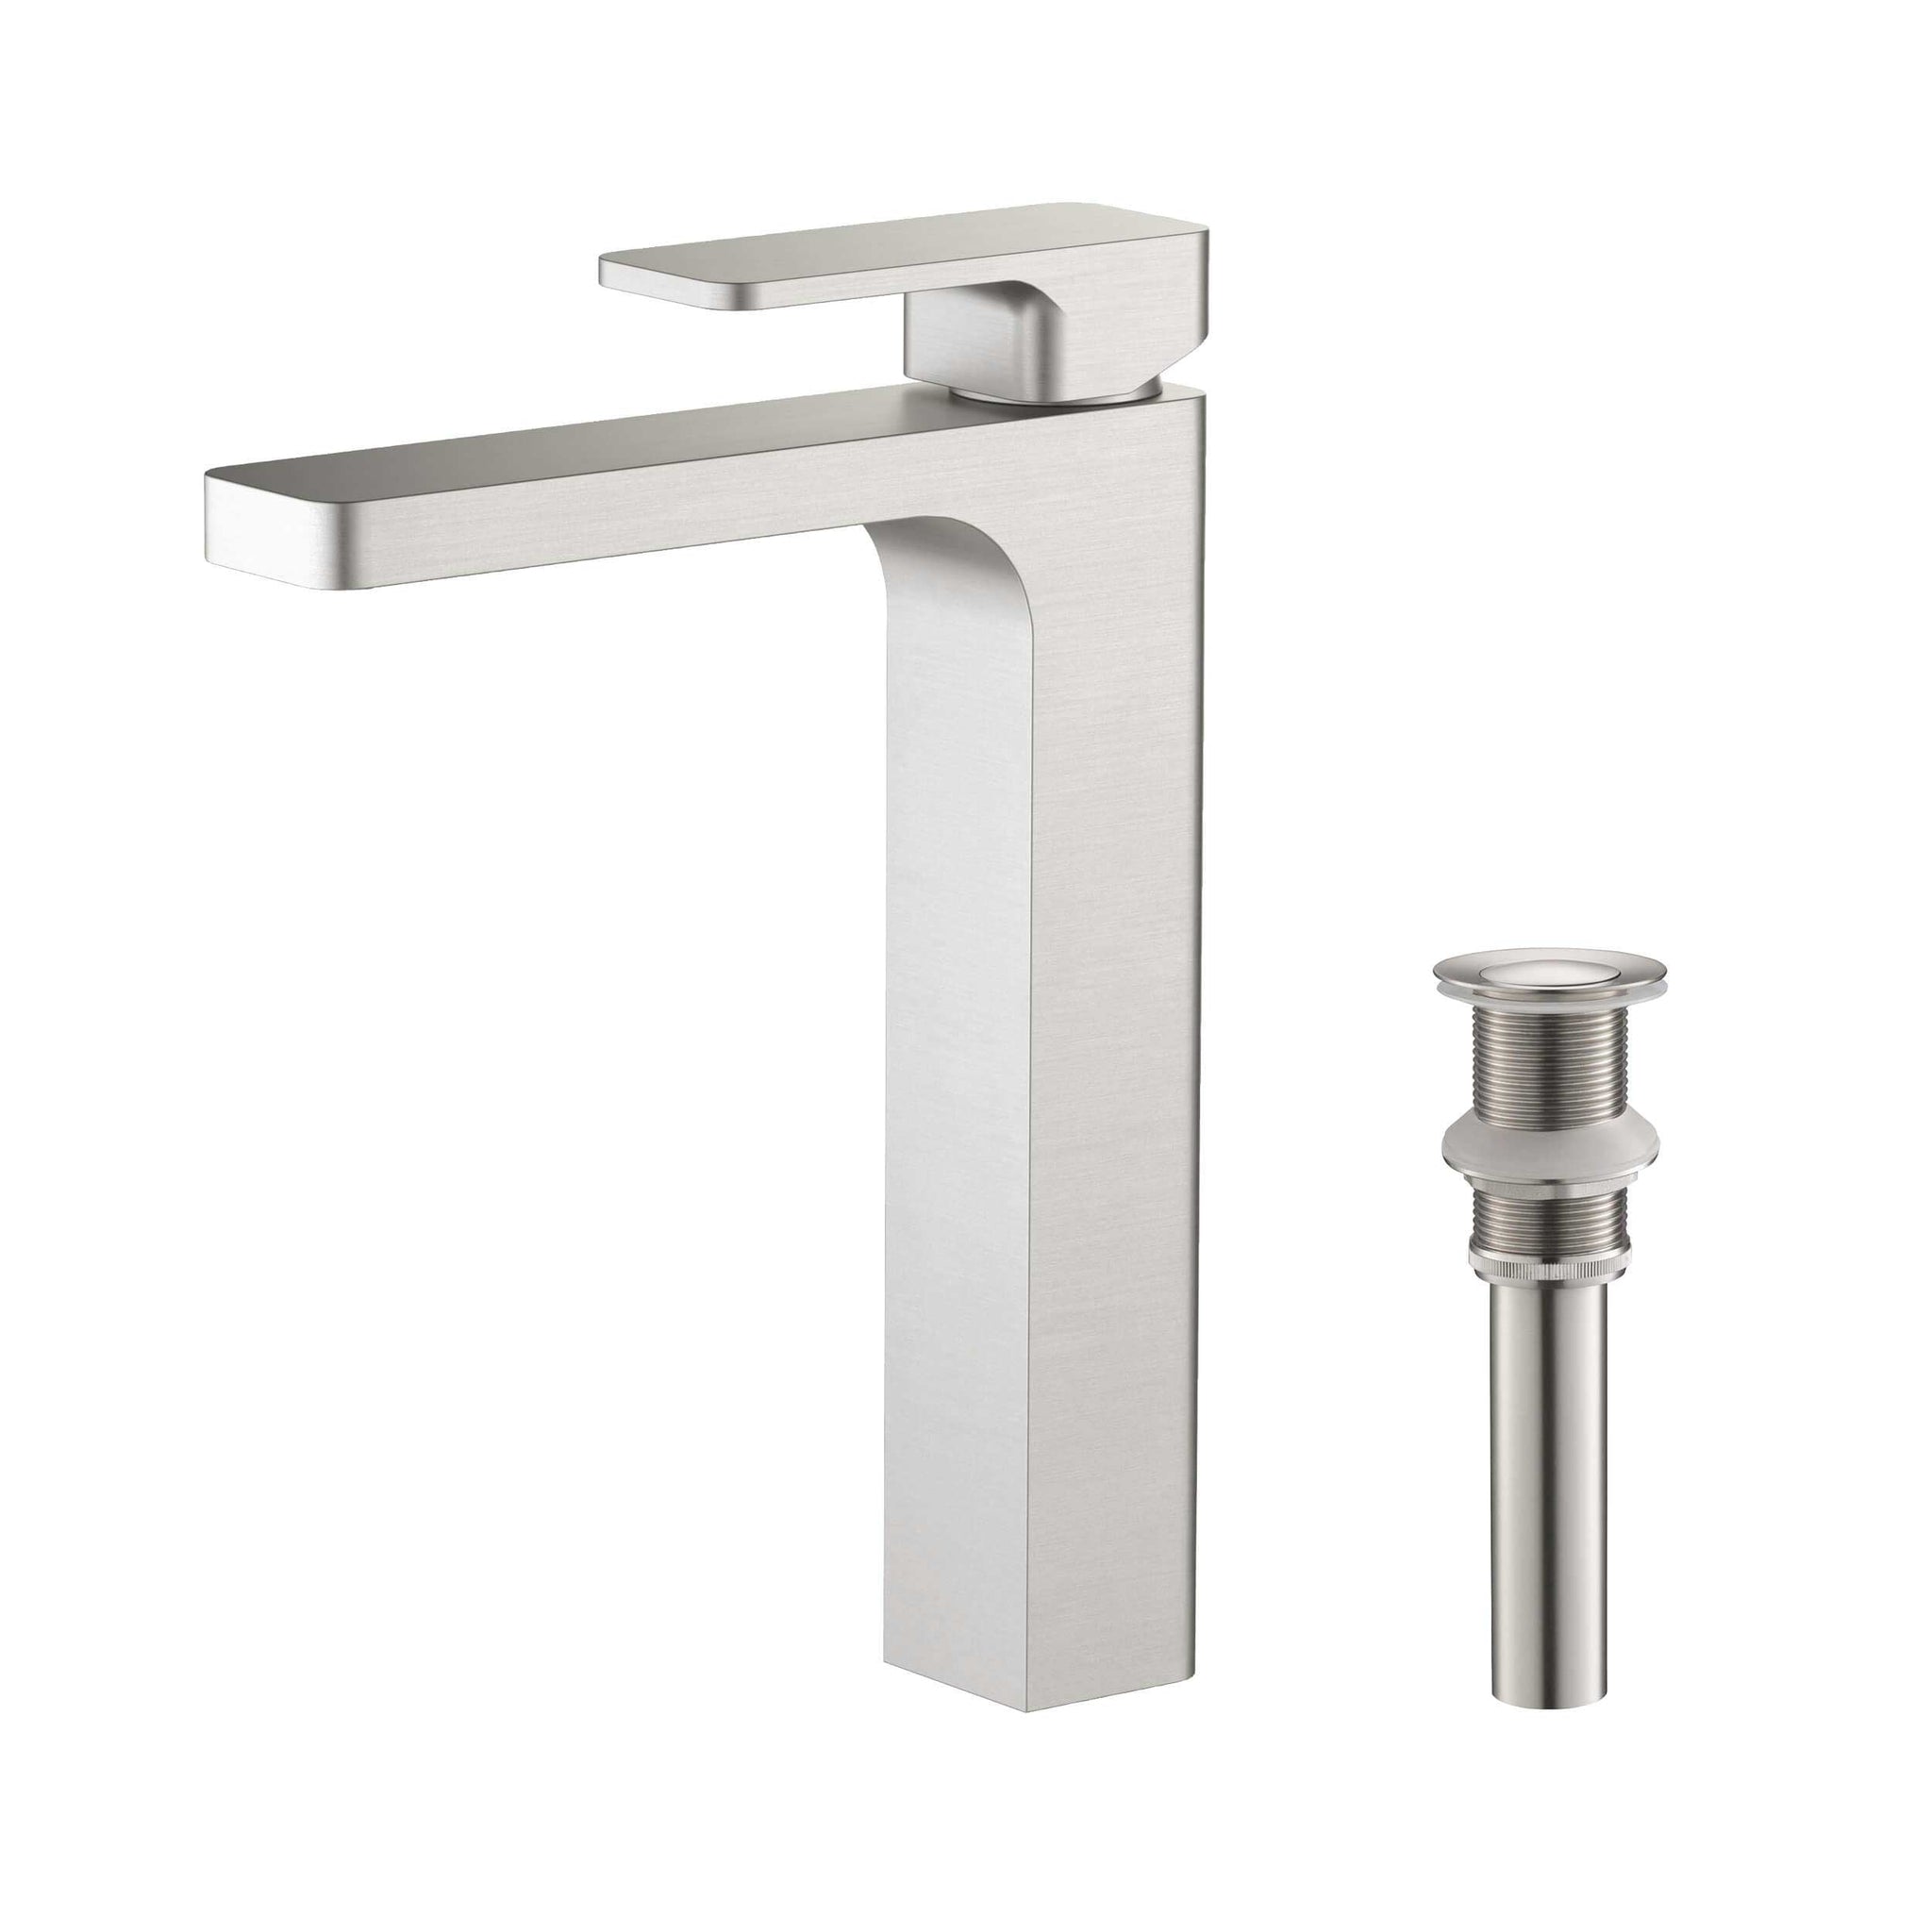 KIBI, KIBI Blaze-T Single Handle Brushed Nickel Solid Brass Bathroom Vessel Sink Faucet With Pop-Up Drain Stopper Small Cover Without Overflow